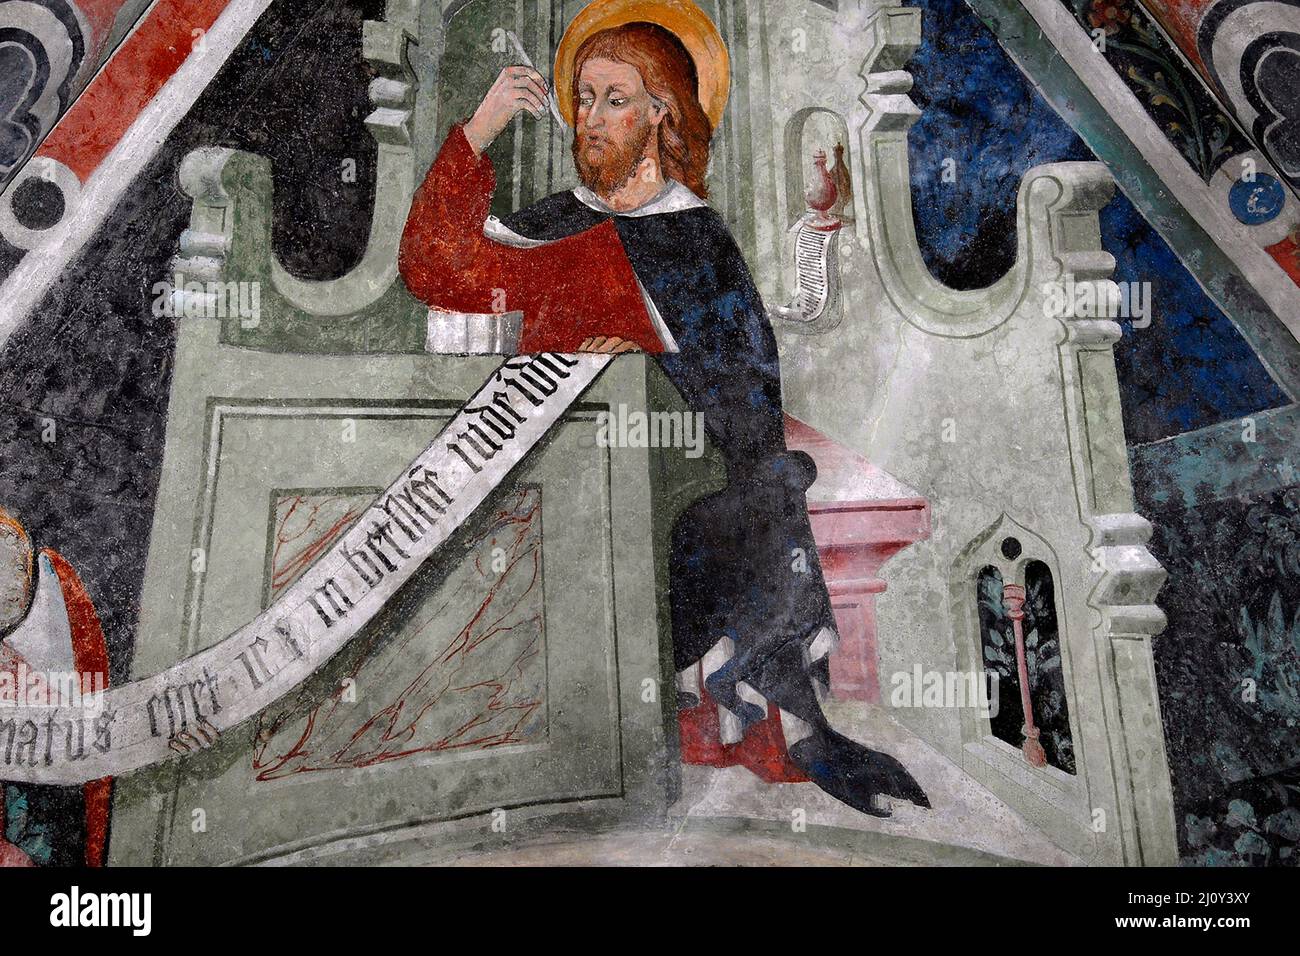 Red-haired Saint Matthew the Evangelist sits at a desk writing his Gospel in 1400s Piedmontese Late Gothic fresco cycle.  On ceiling vault in the church of the former Franciscan convent at Susa, Piedmont, Italy. Stock Photo